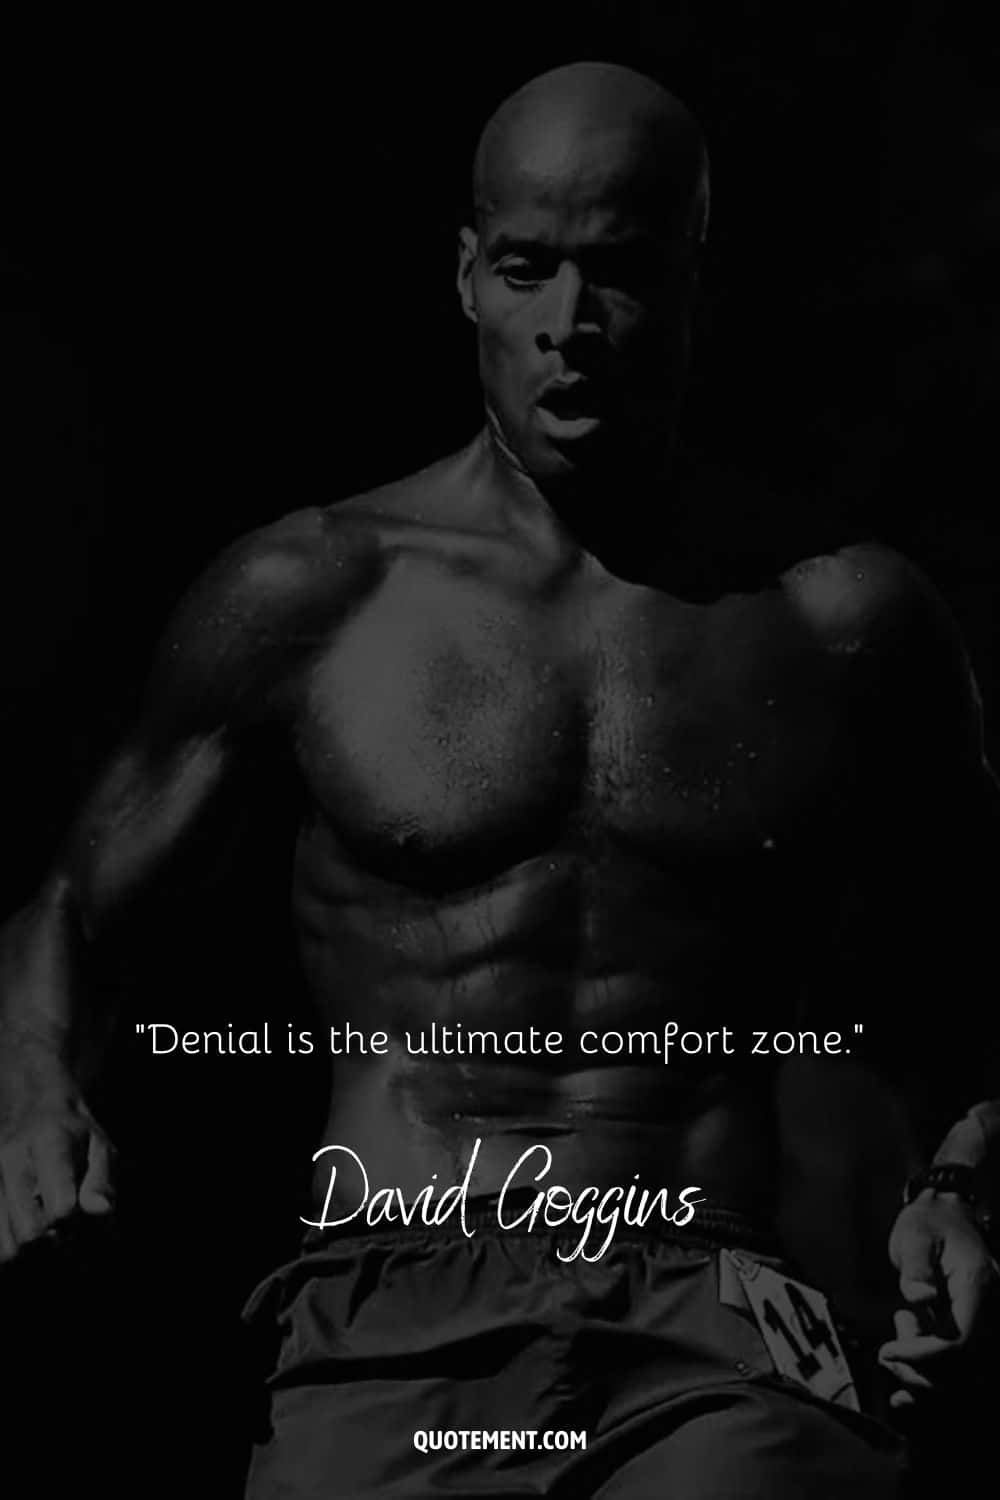 Eye-opening David Goggins quote and his black and white photo in the background.